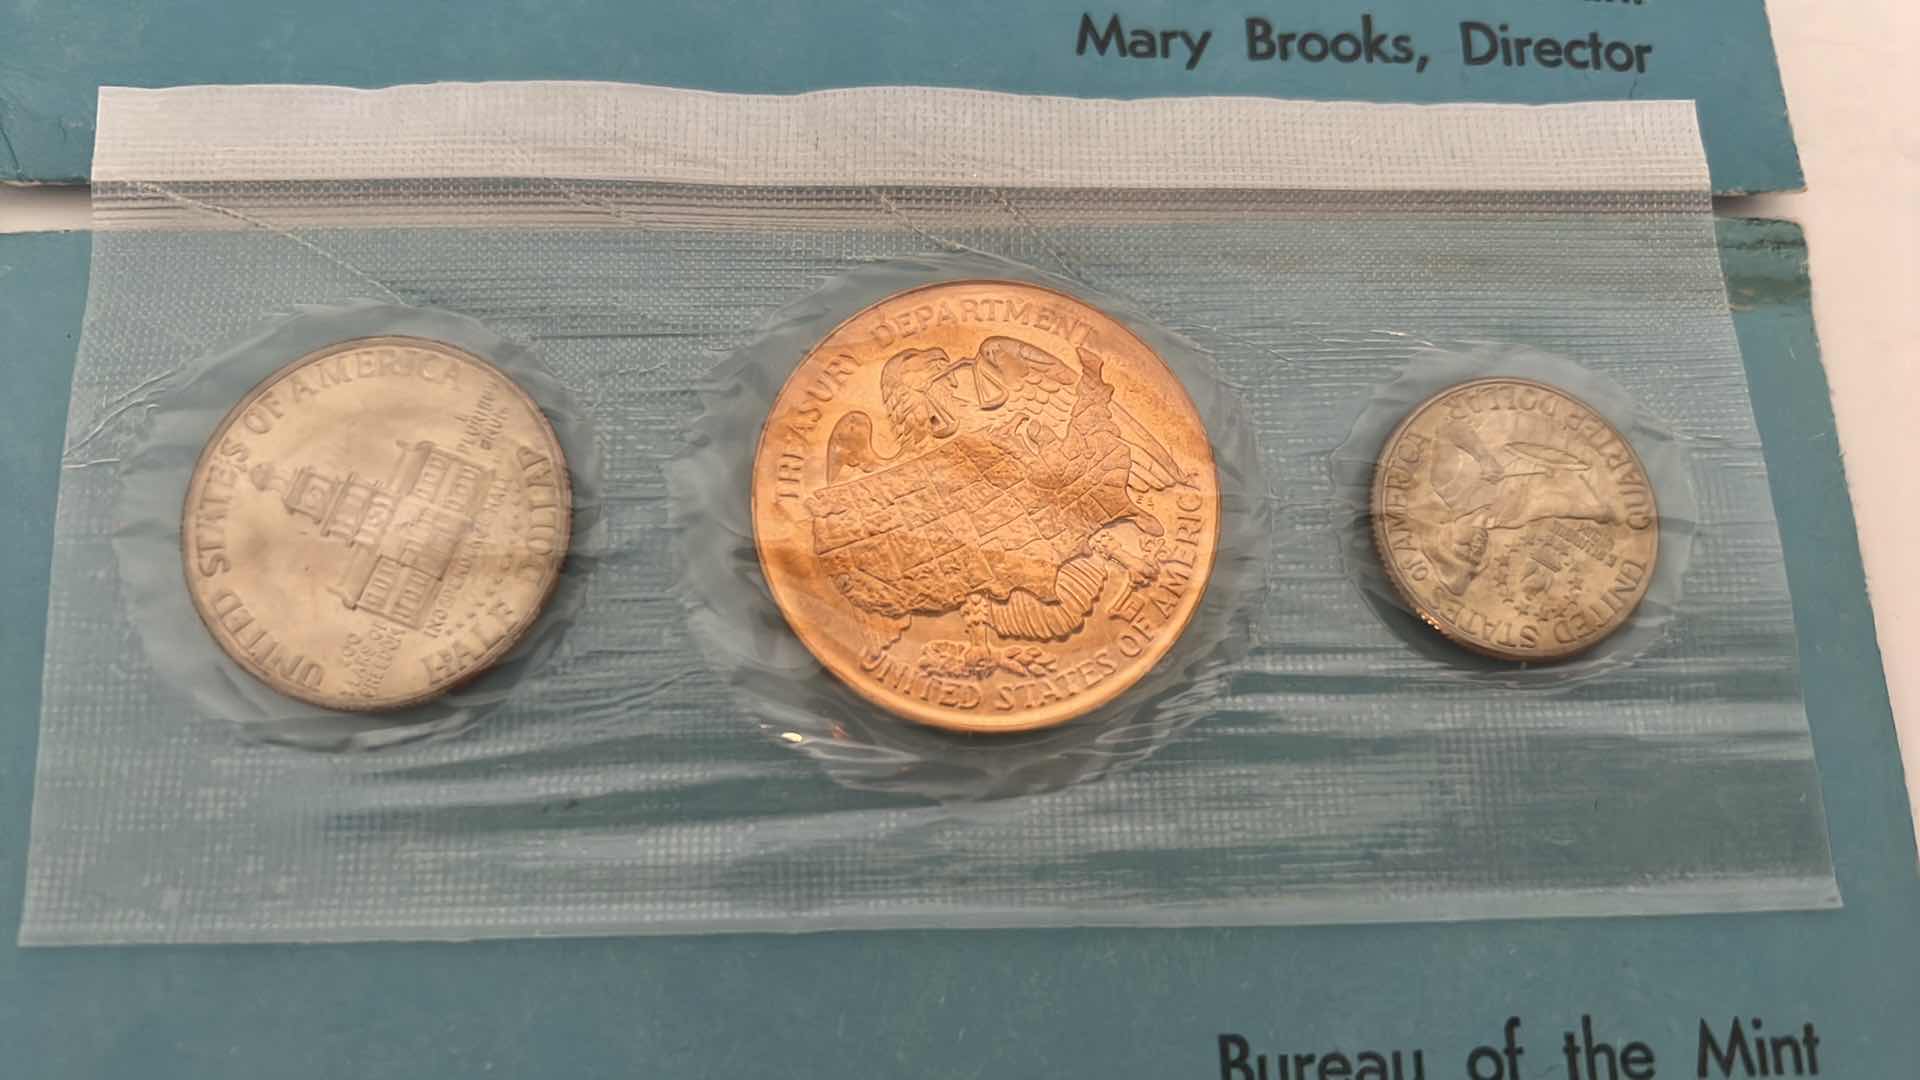 Photo 2 of 3 SETS- UNCIRCULATED BUREAU OF THE MINT MARY BROOKS DIRECTOR COIN COLLECTION